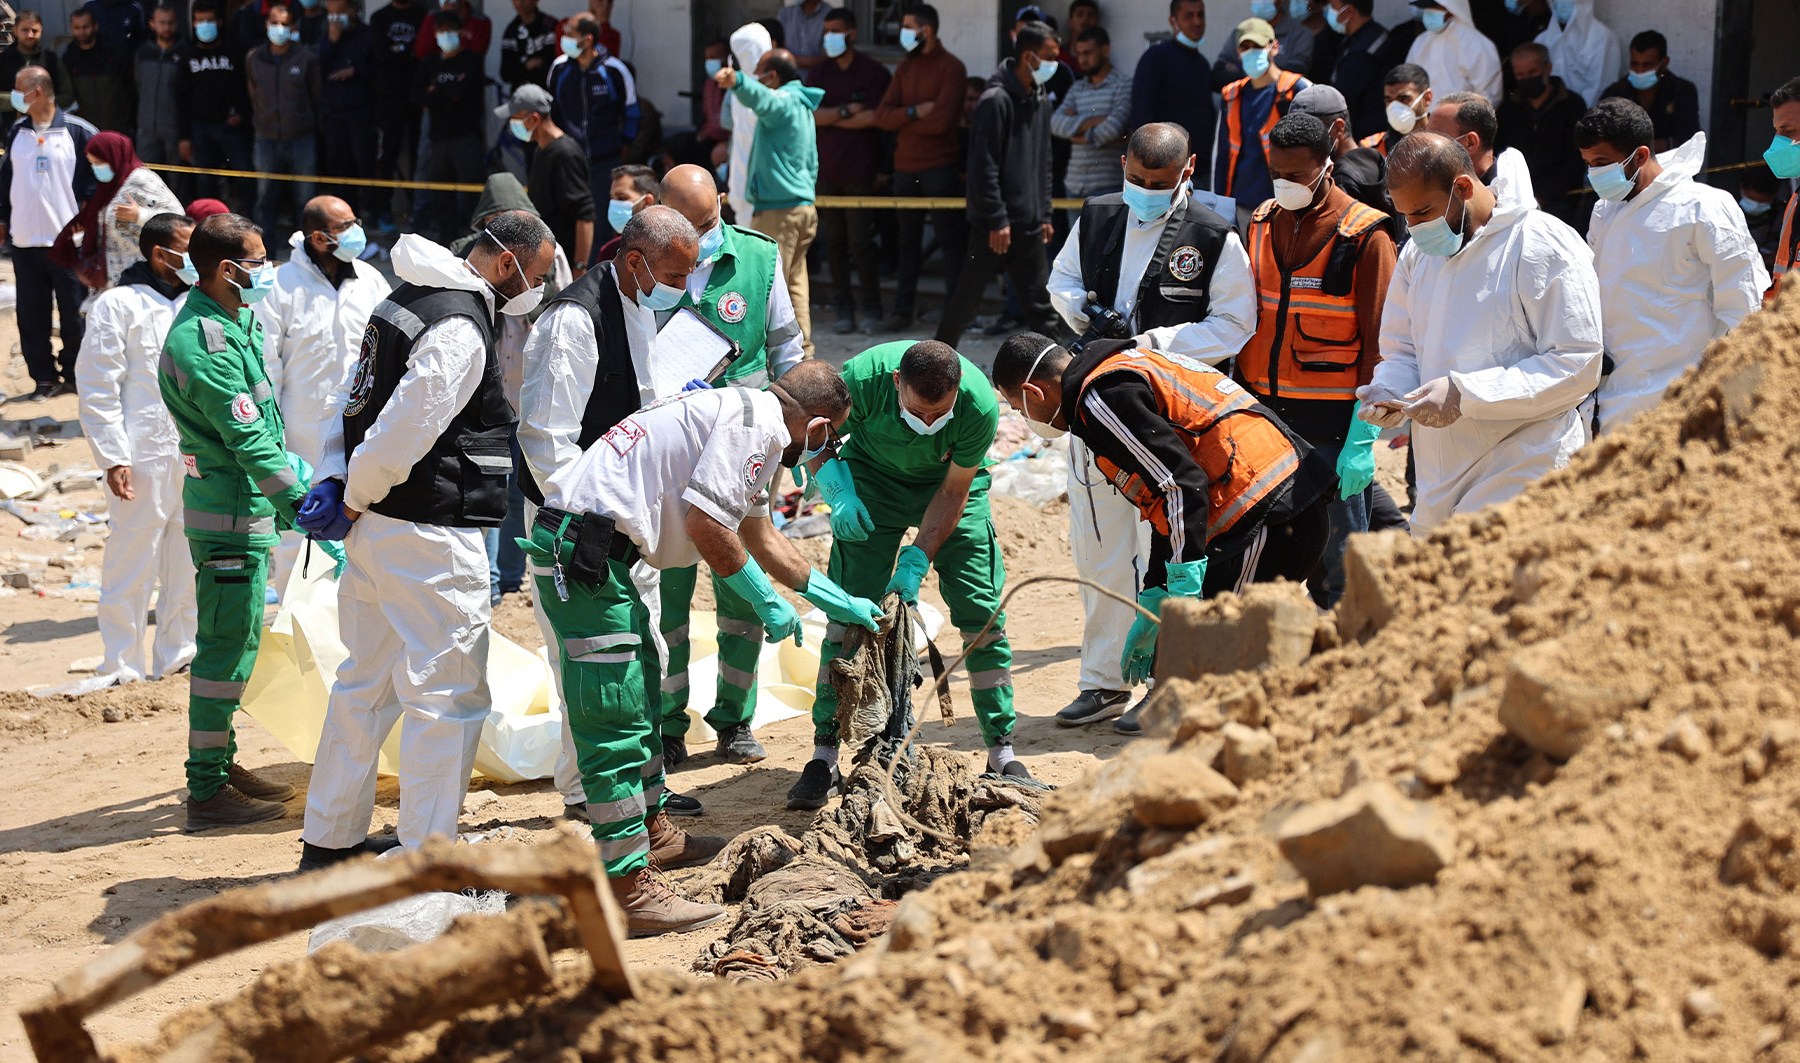 Mass grave discovered at Gaza hospital occupied by Israeli forces | Gaza